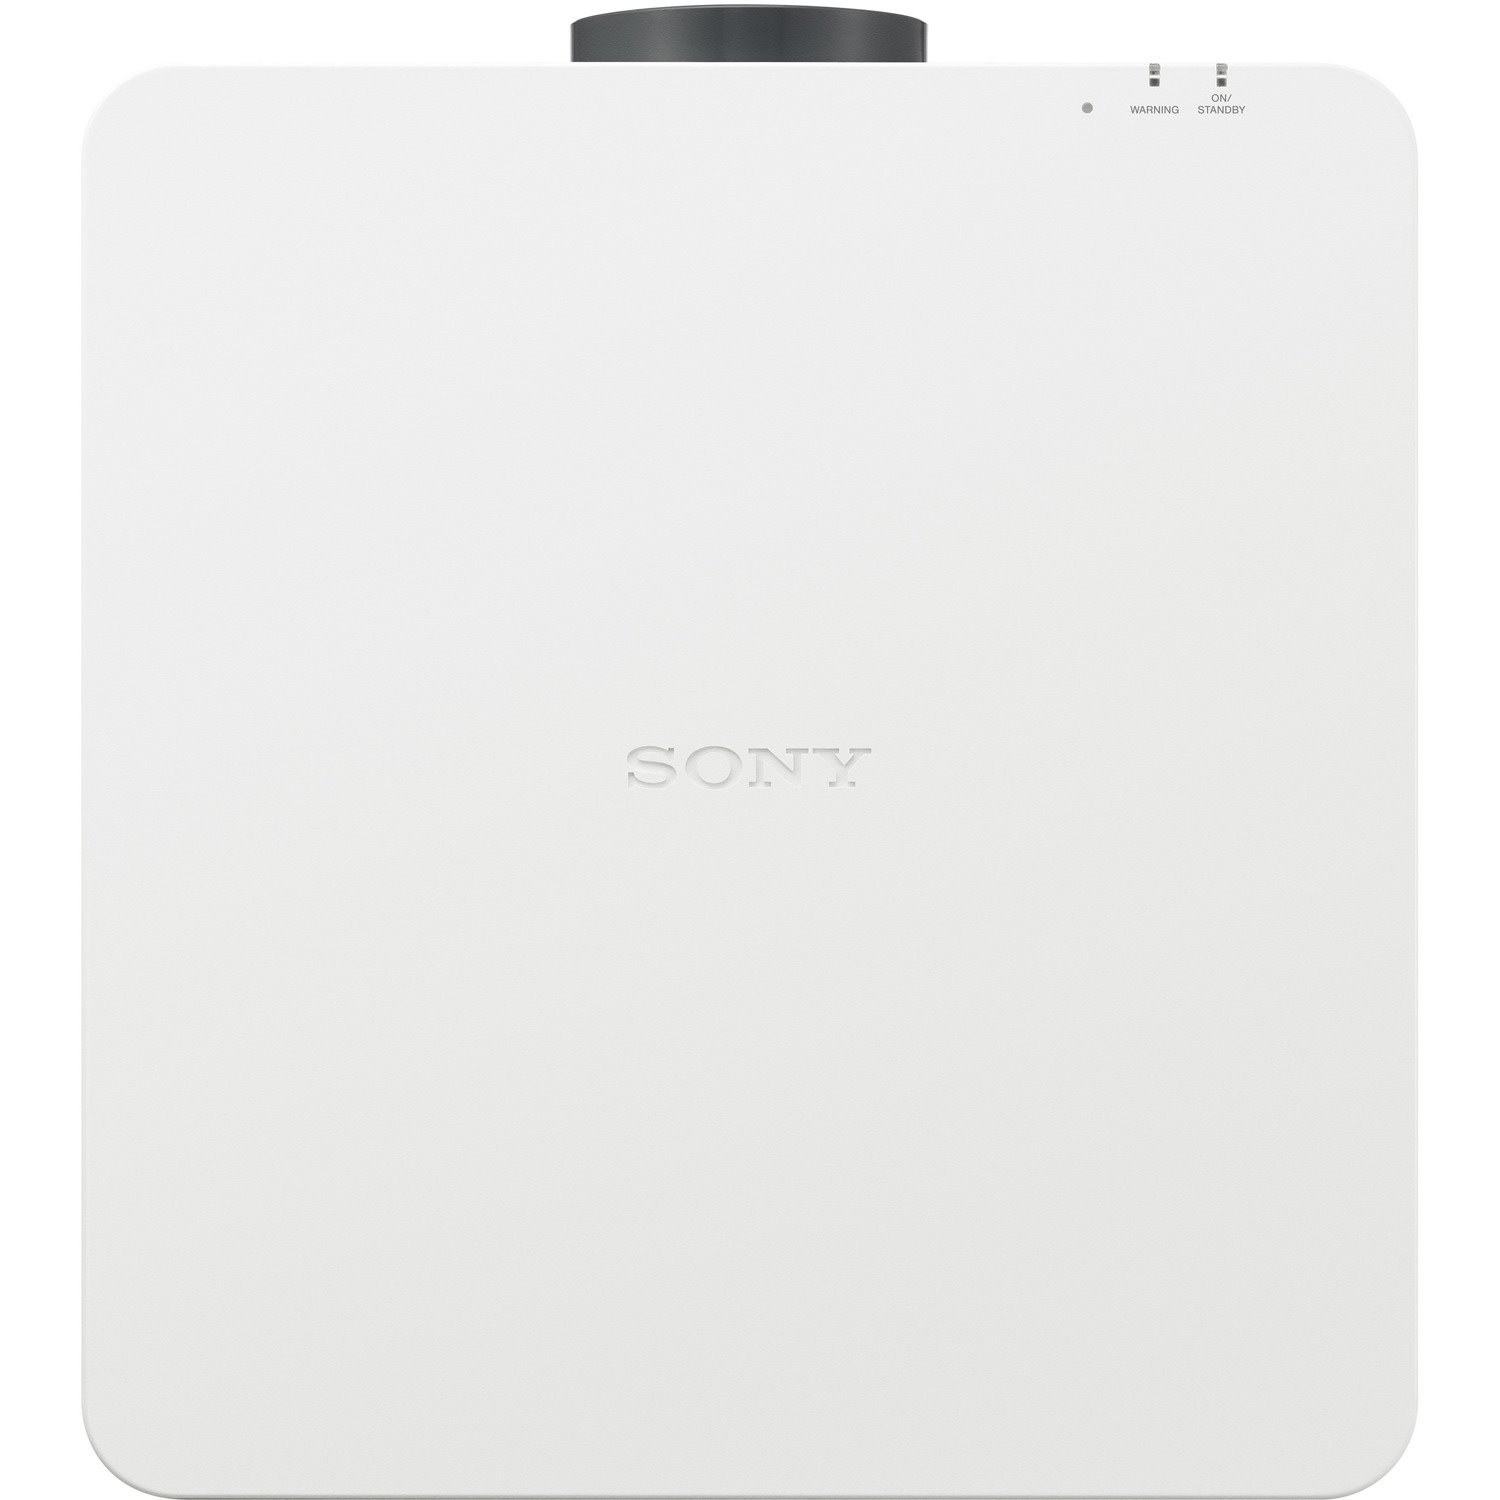 Sony BrightEra VPL-FHZ80 3LCD Projector - 16:10 - Ceiling Mountable - White